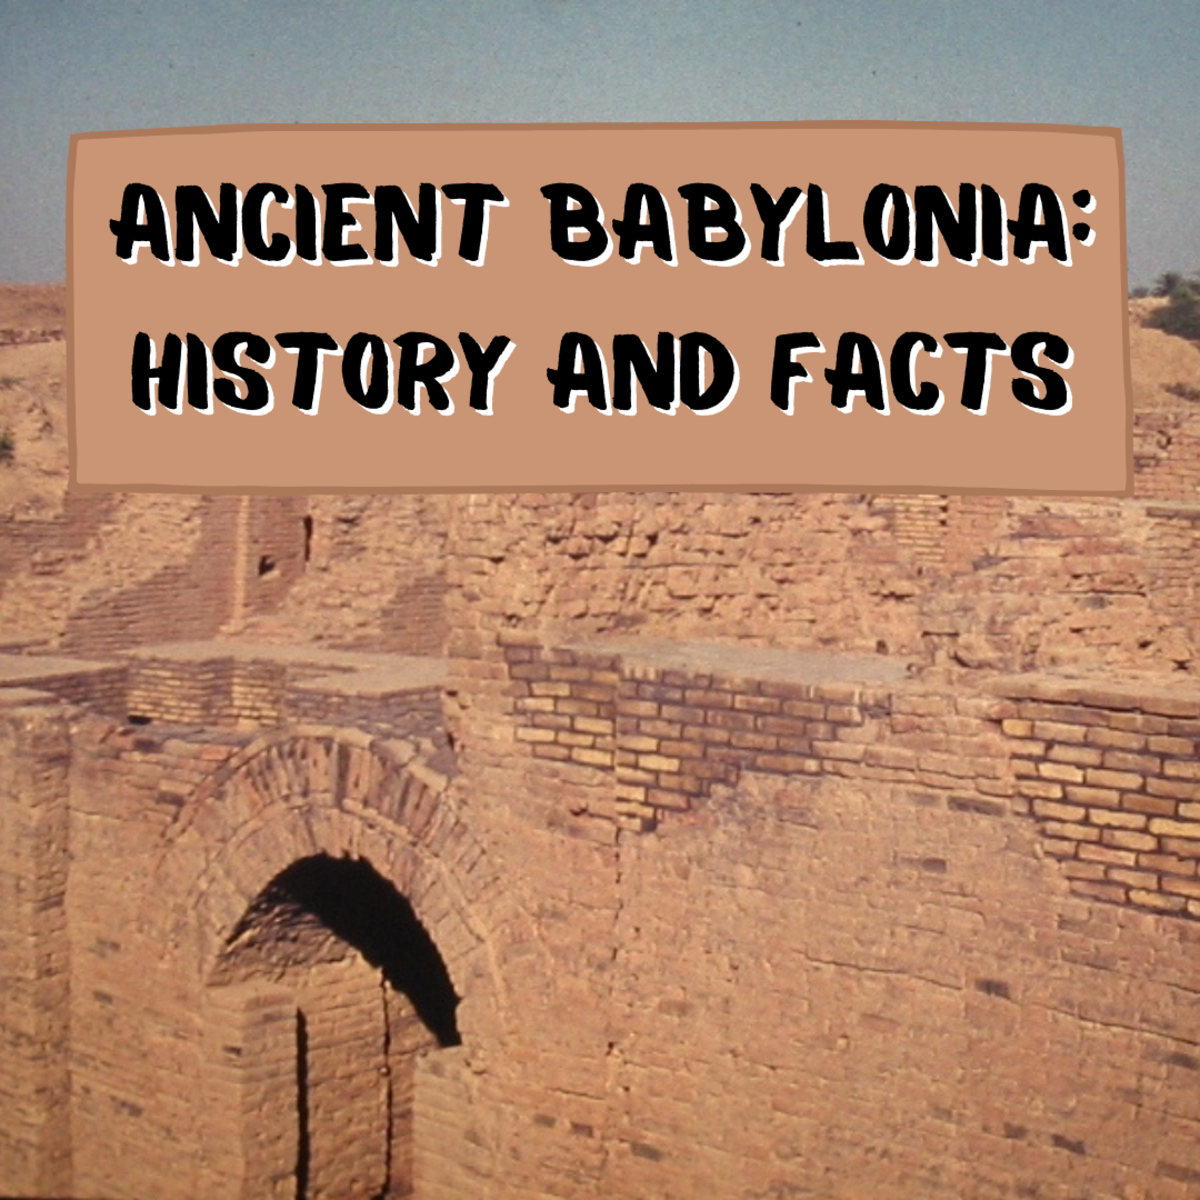 This article will teach you about Mesopotamia and the ancient civilization of Babylonia, including information on Hammurabi, the Kassites, and Nebuchadnezzar II.